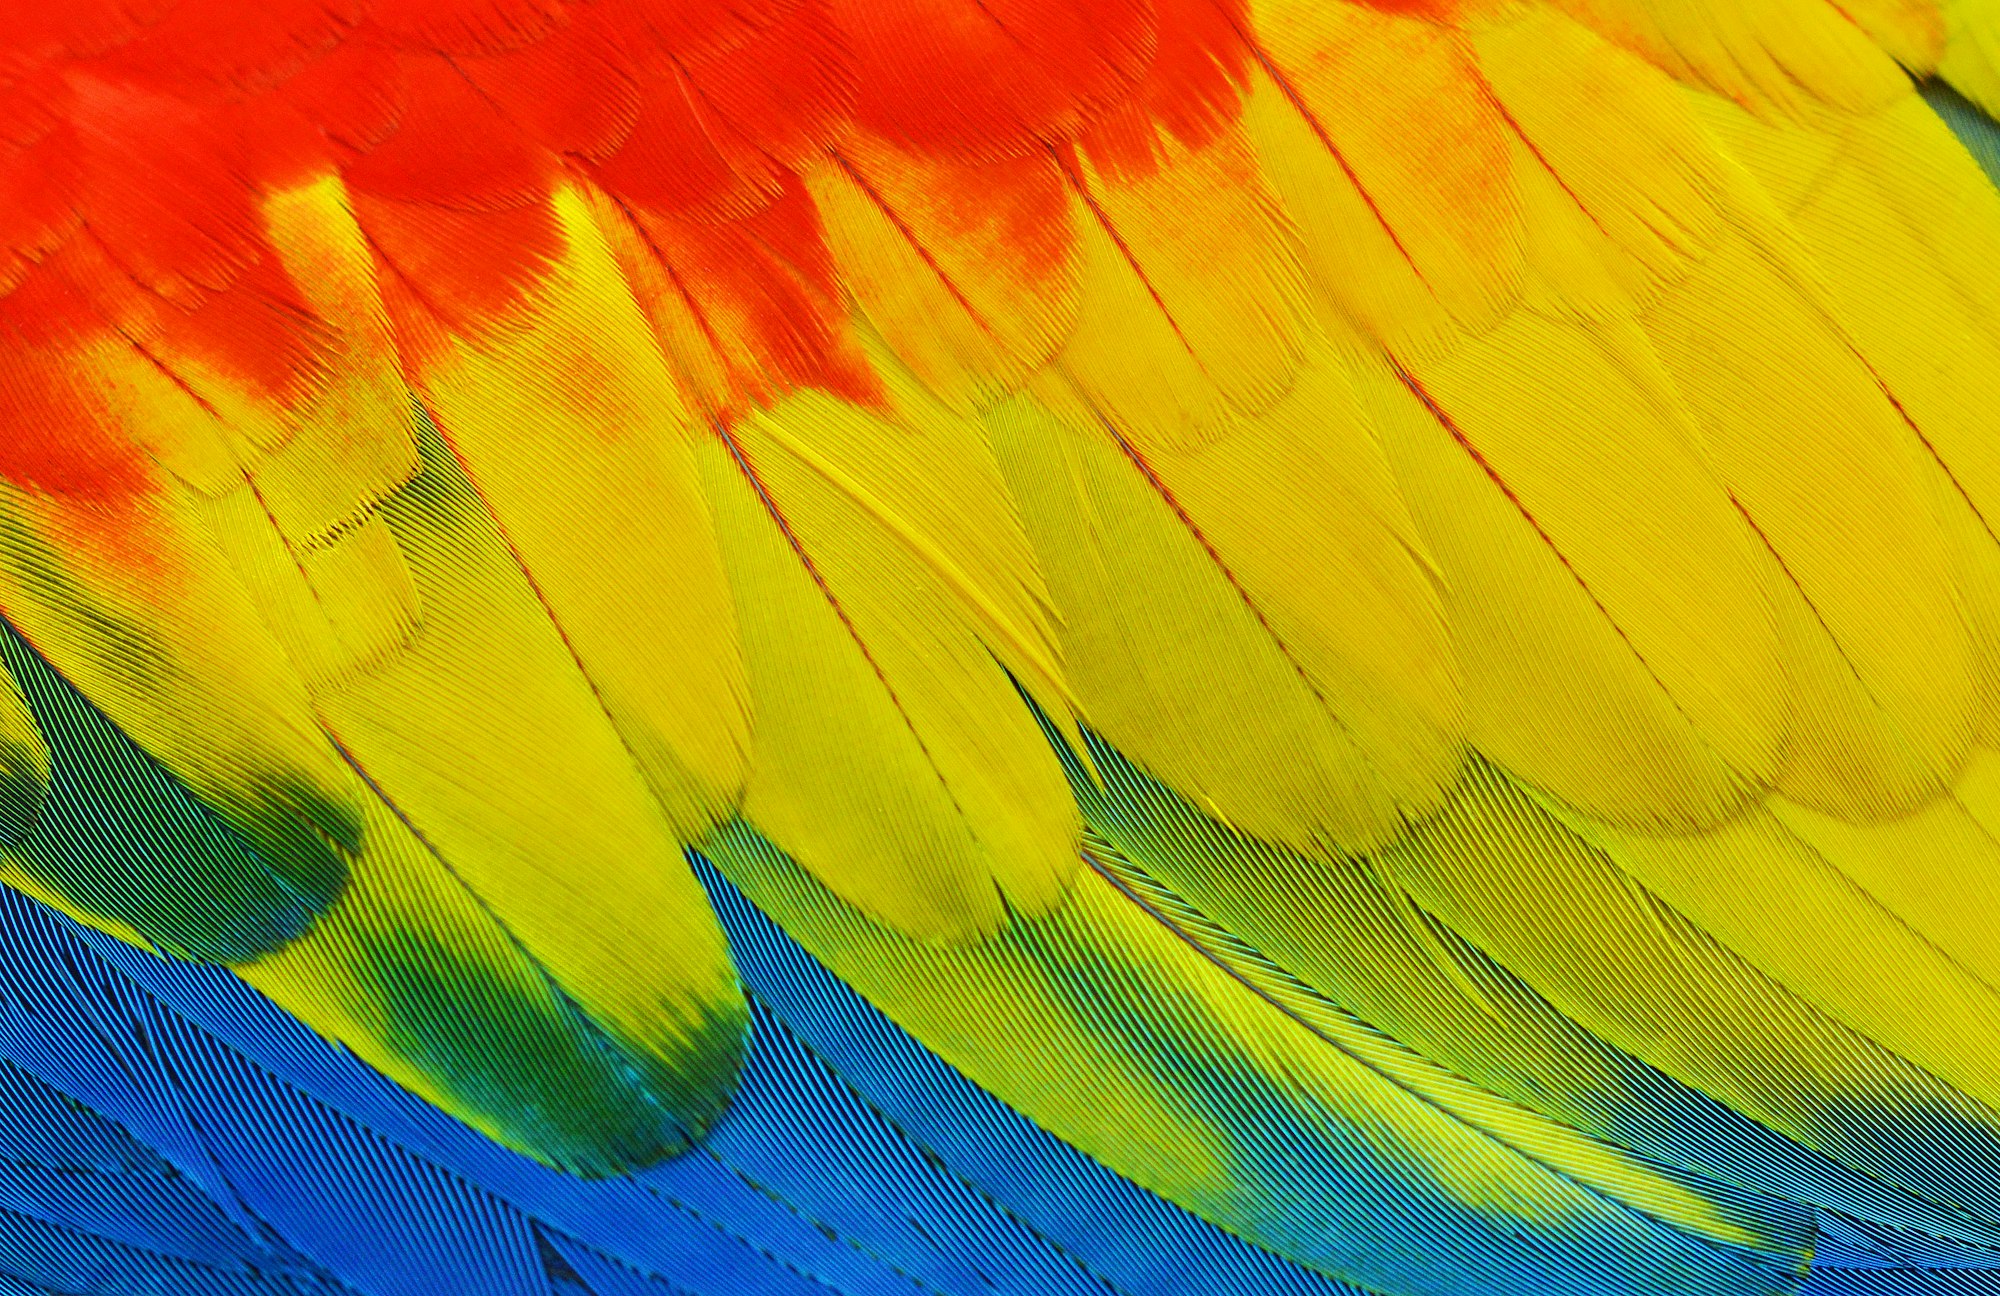 Close up of the amazingly colorful feathers of a Scarlet Macaw parrot. Photo taken at Kuranda Birdworld, Australia.